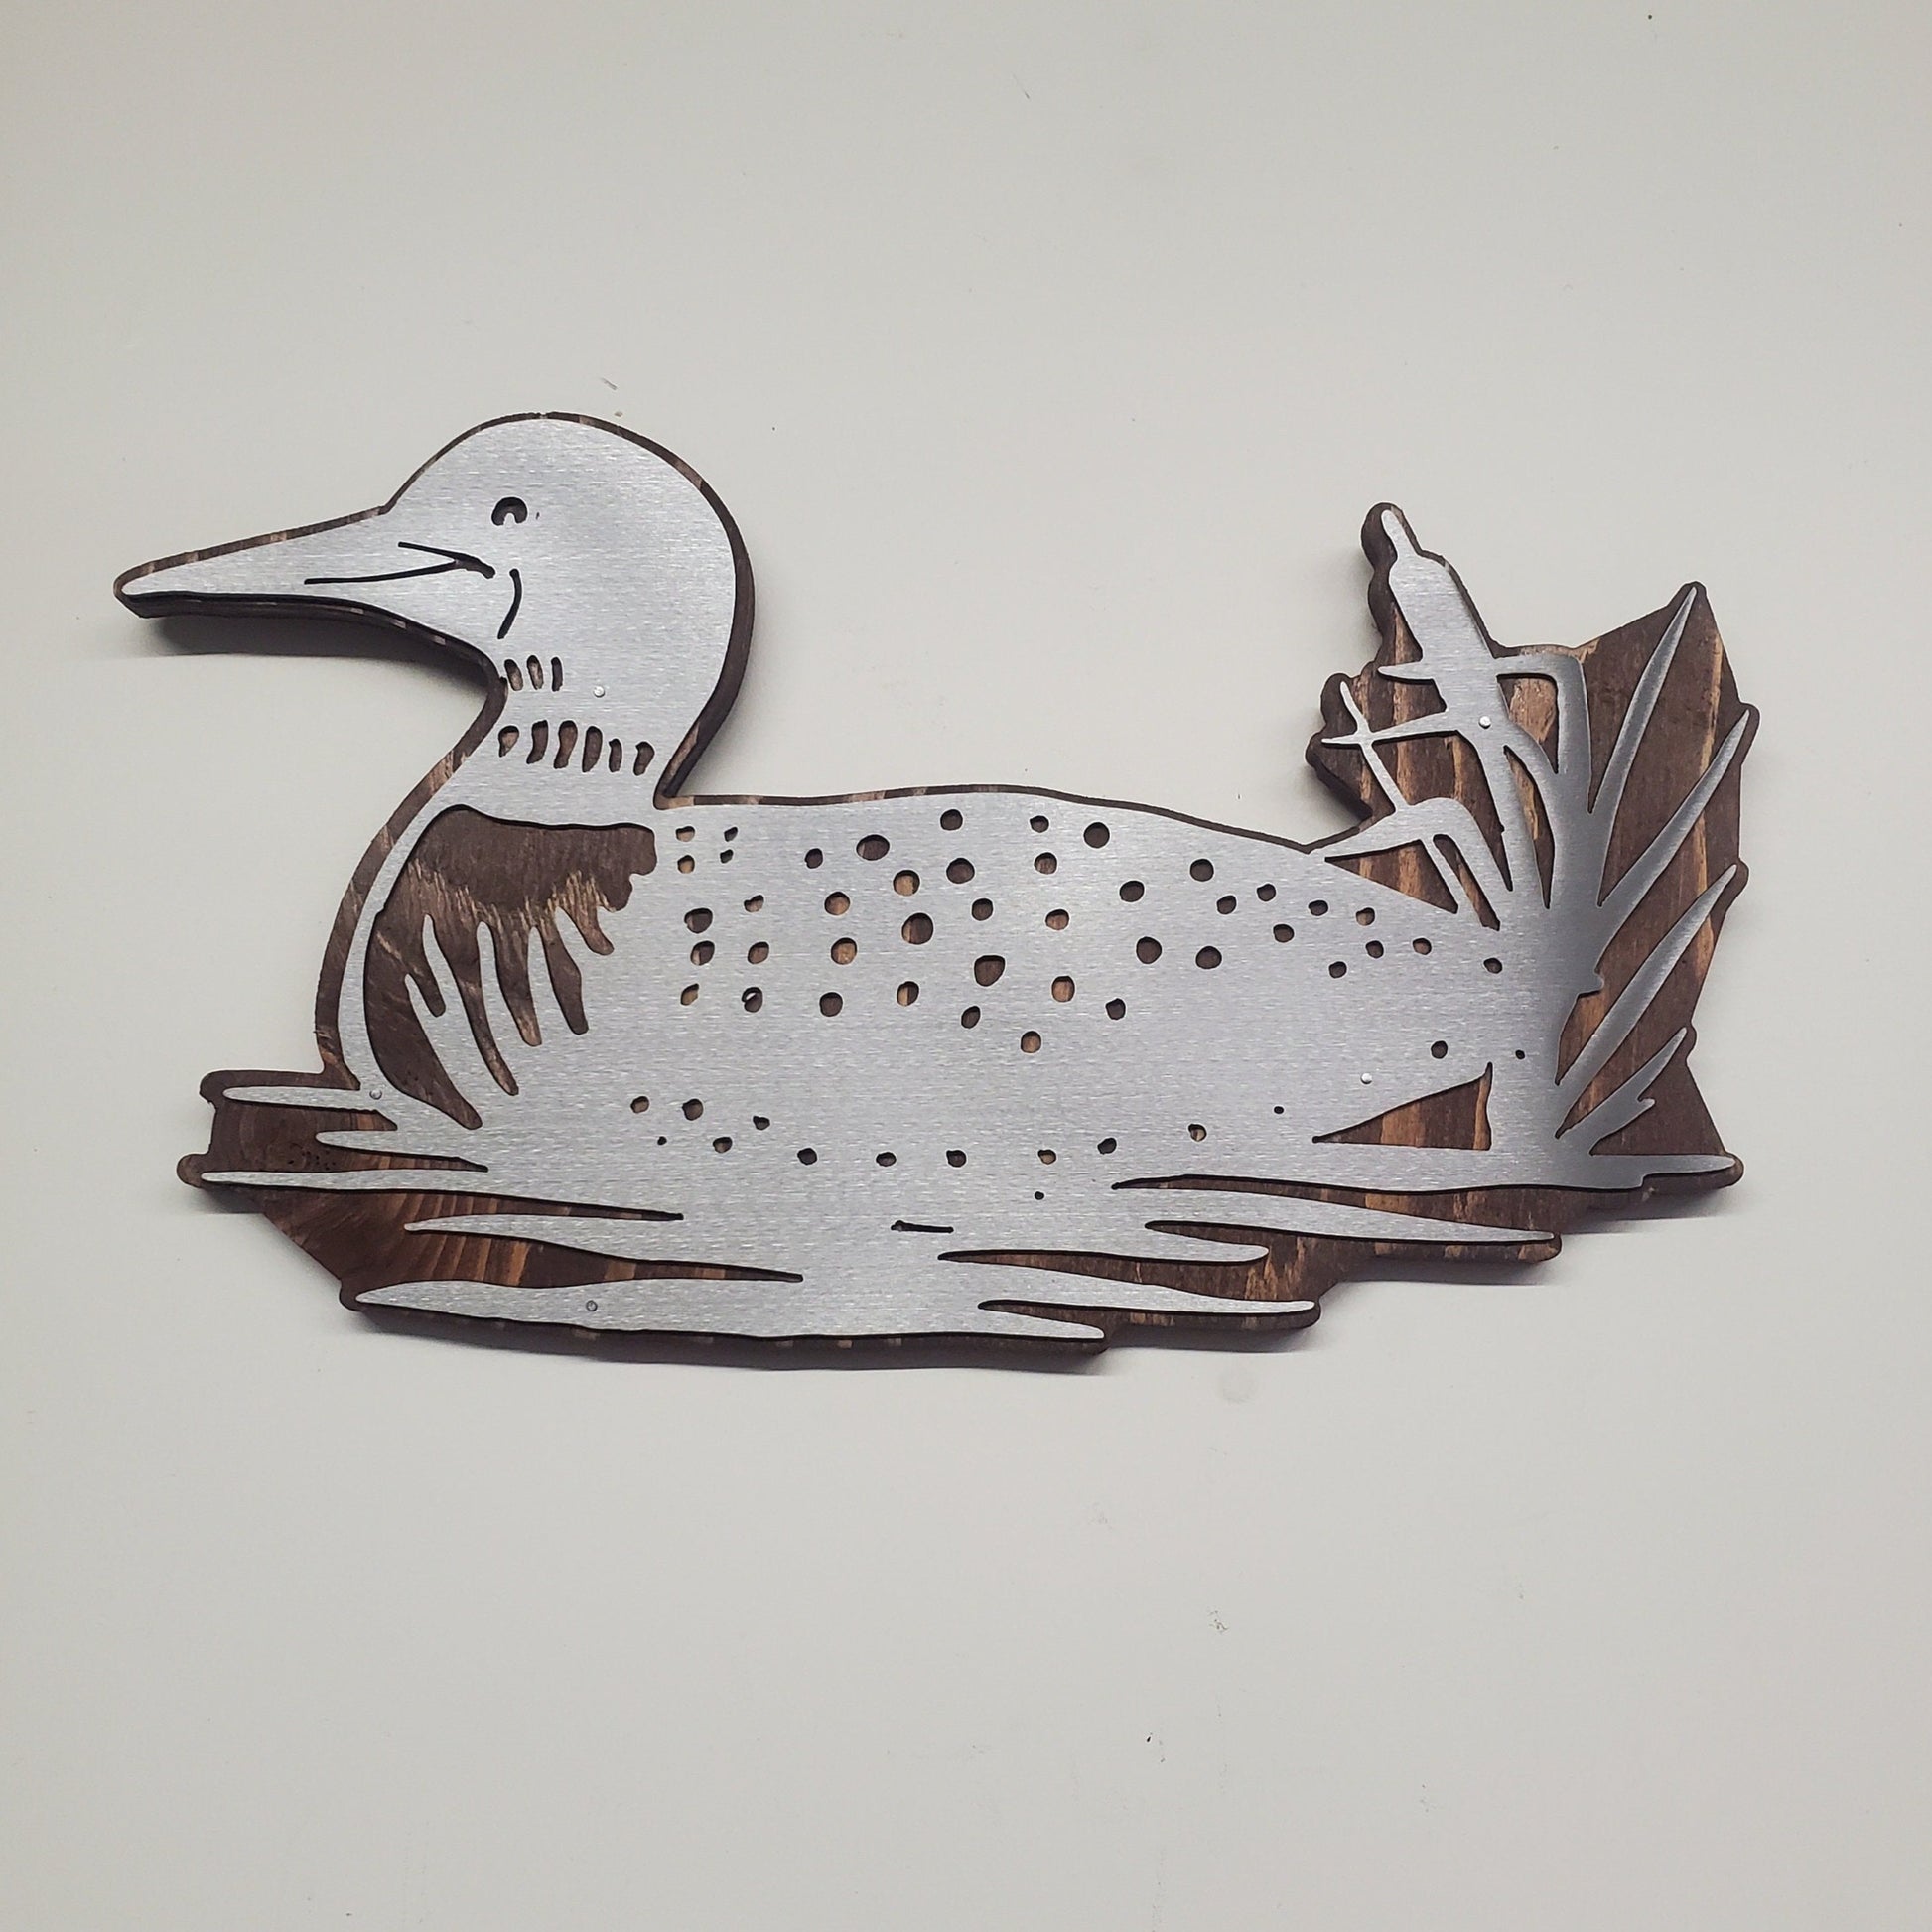 The metal art loon is made from high-quality steel and is very durable. It is created by an artist from Minnesota, so you can be sure that the product is made with care and attention to detail